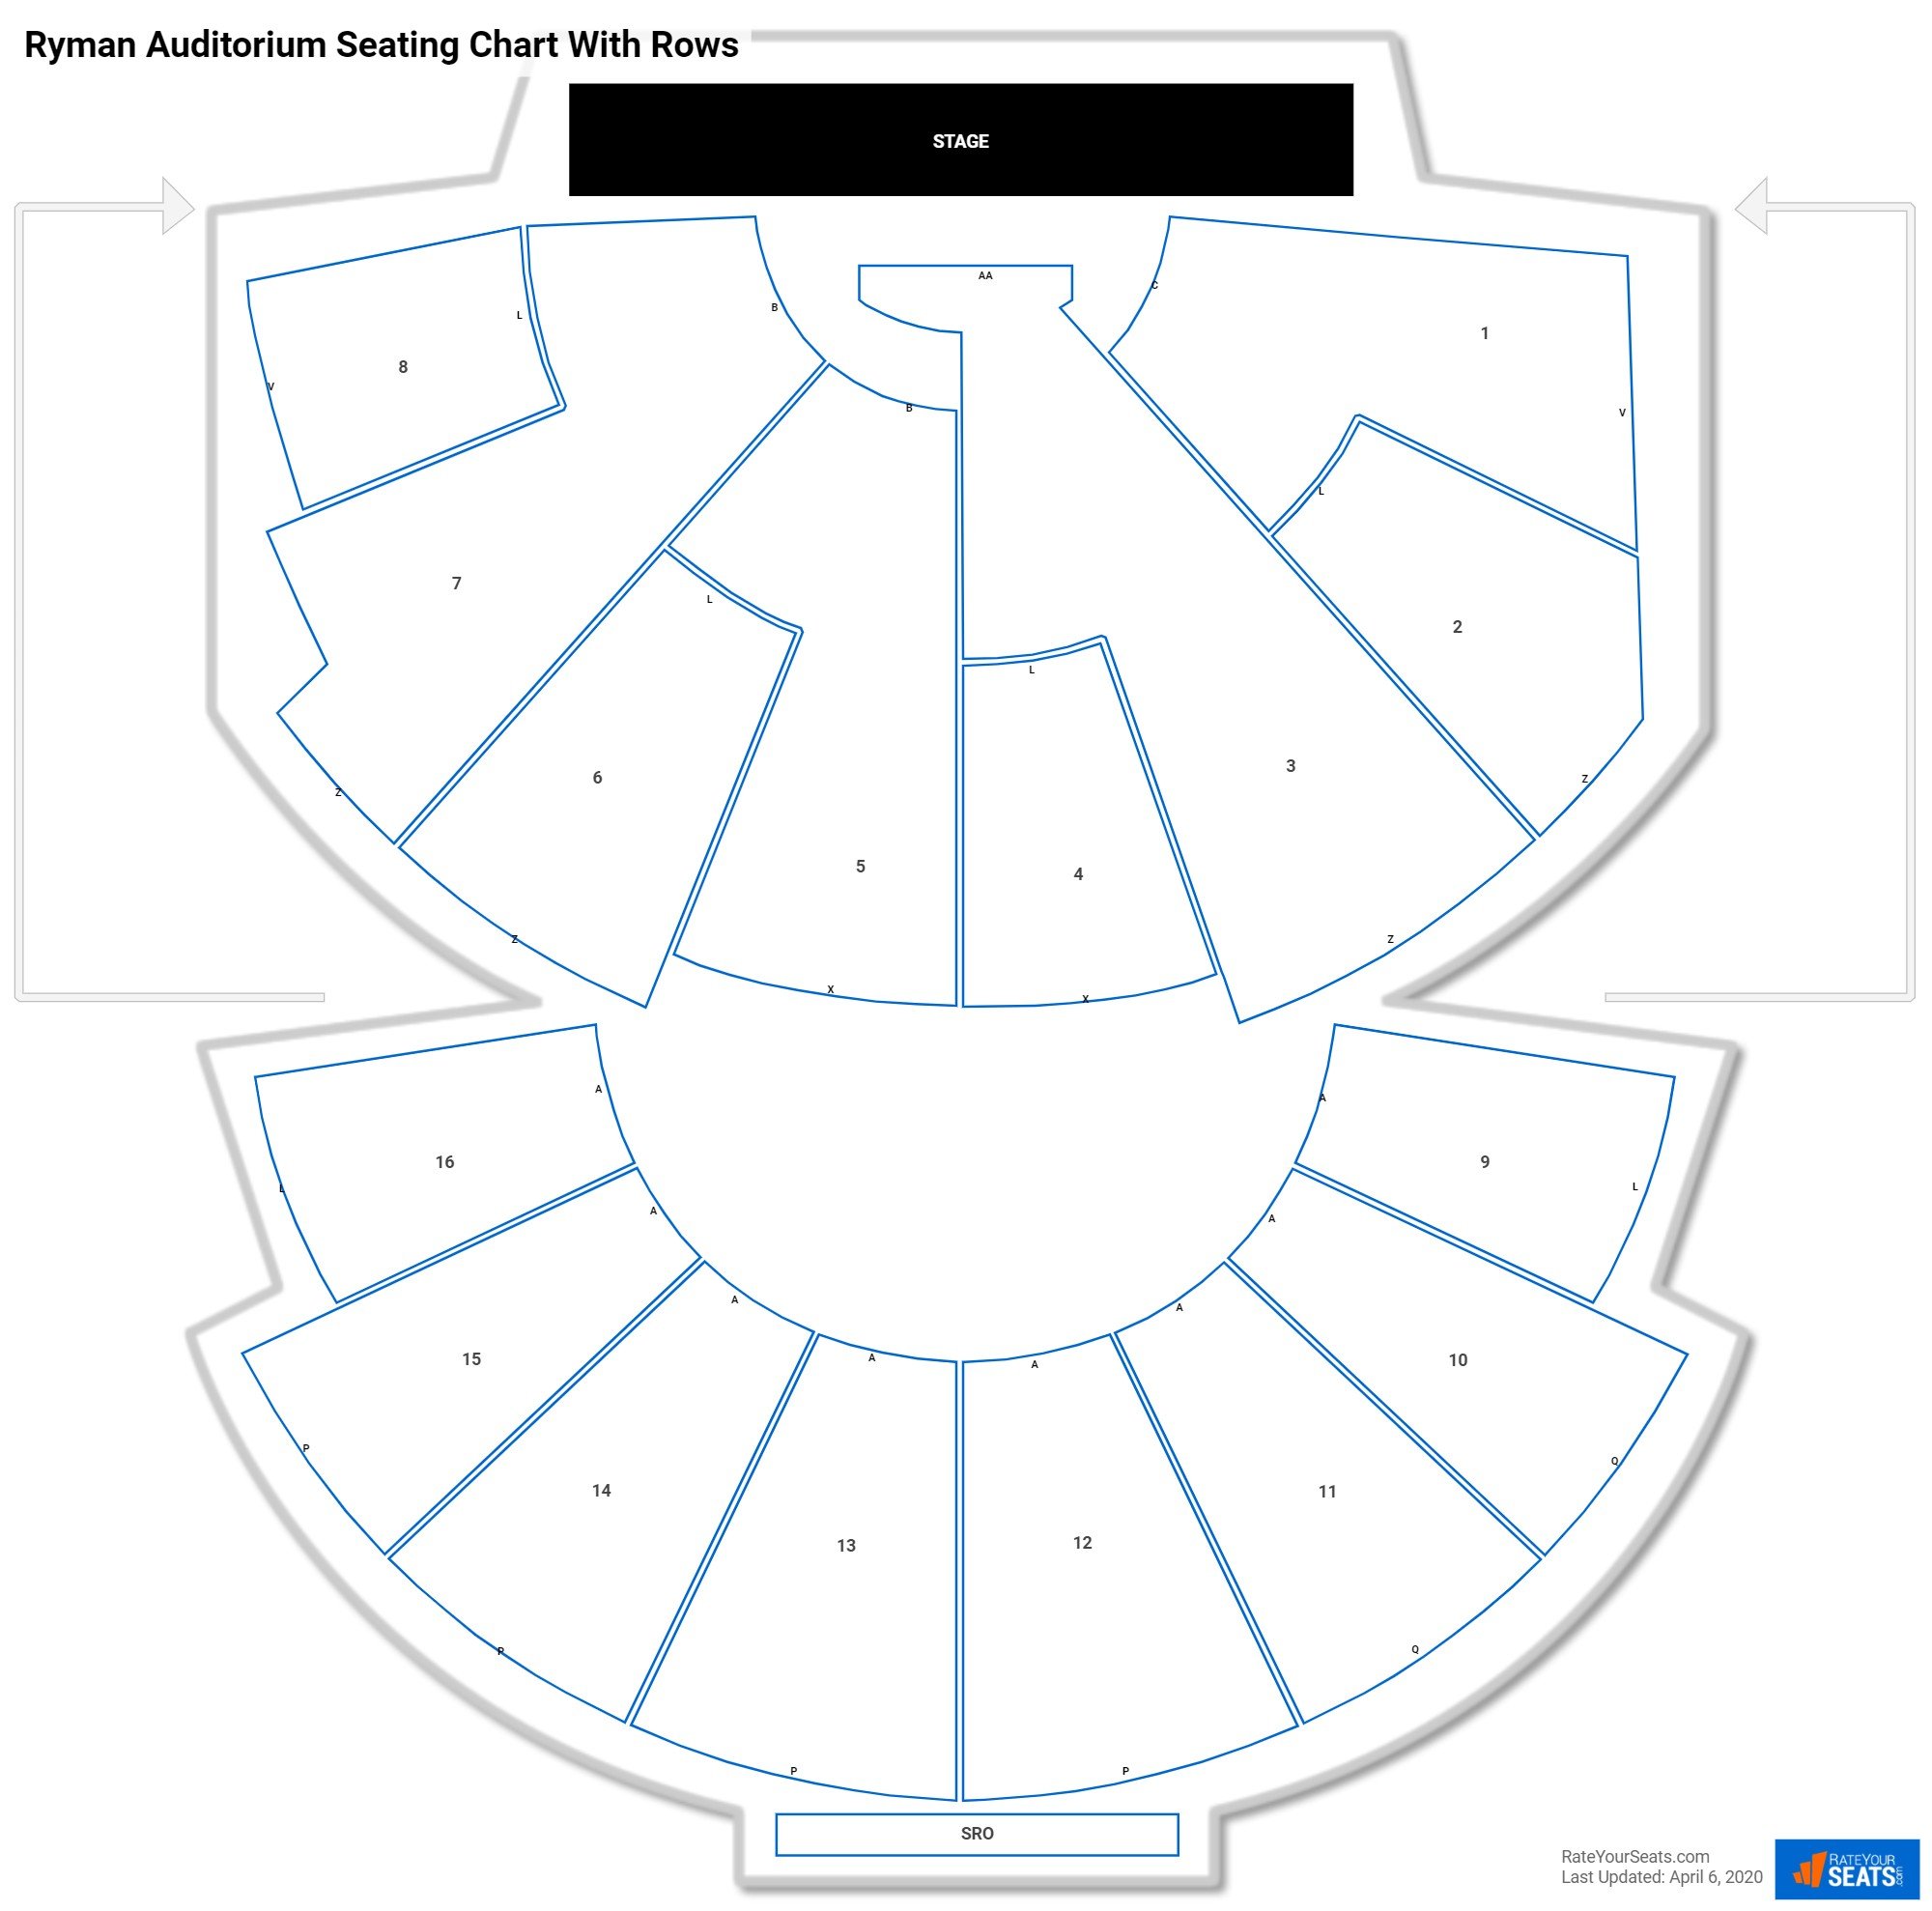 Ryman Auditorium seating chart with row numbers